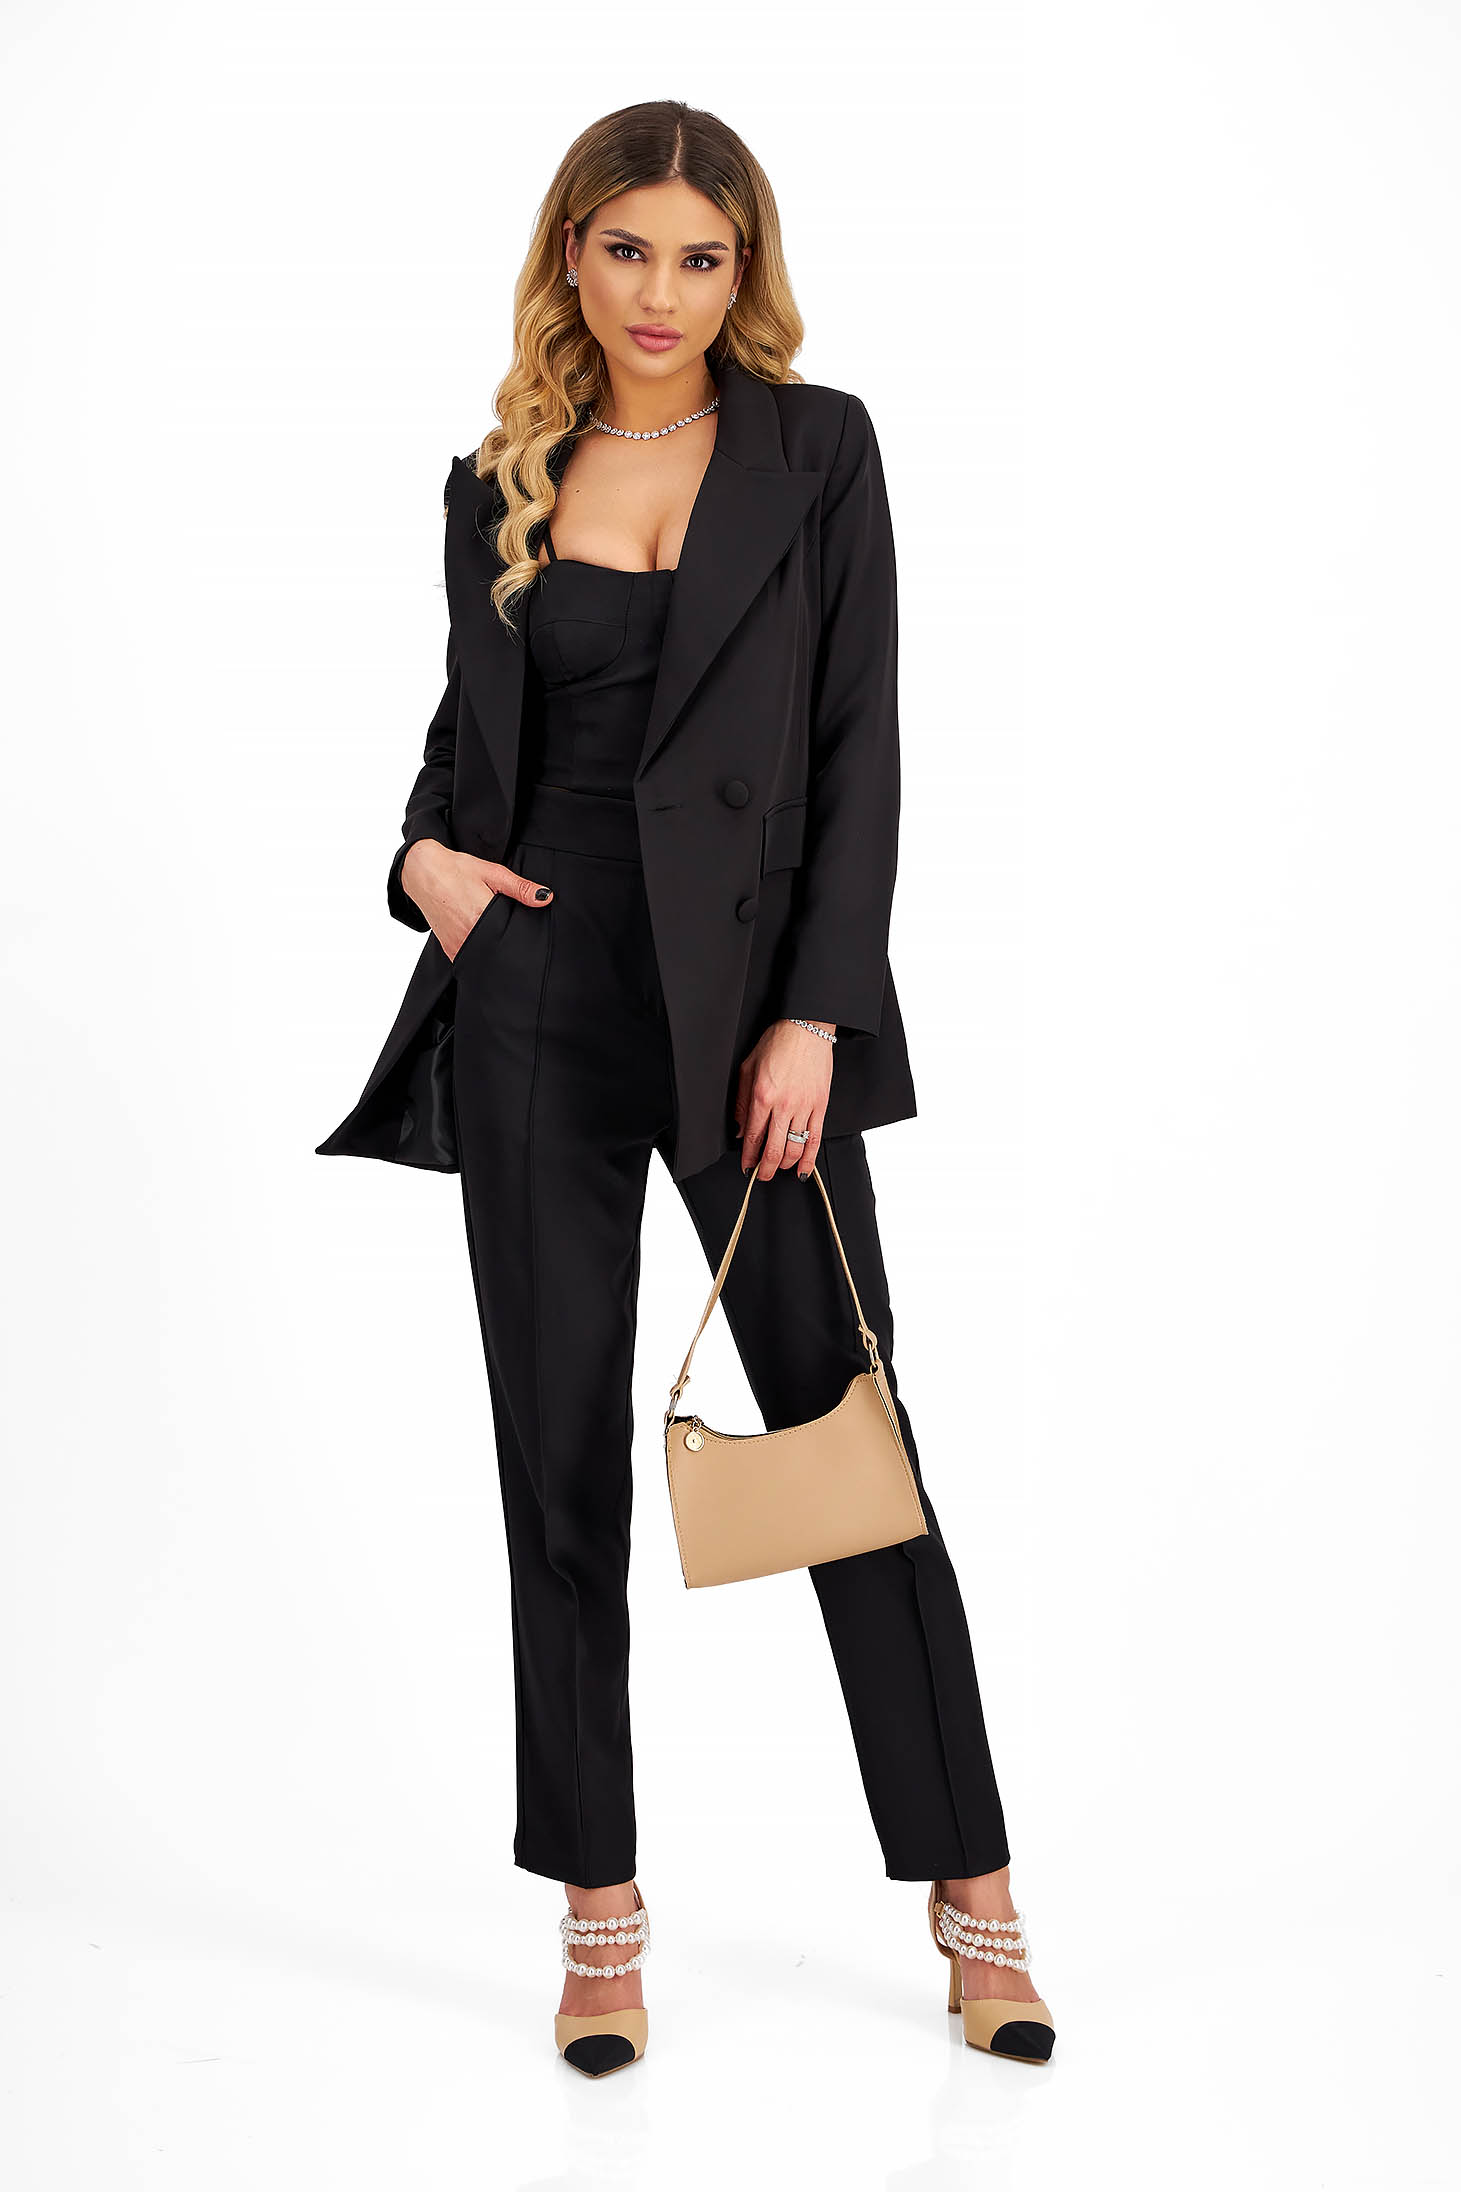 Lili's Notched Collar Suit | LILI BLANC Luxury Clothes for women